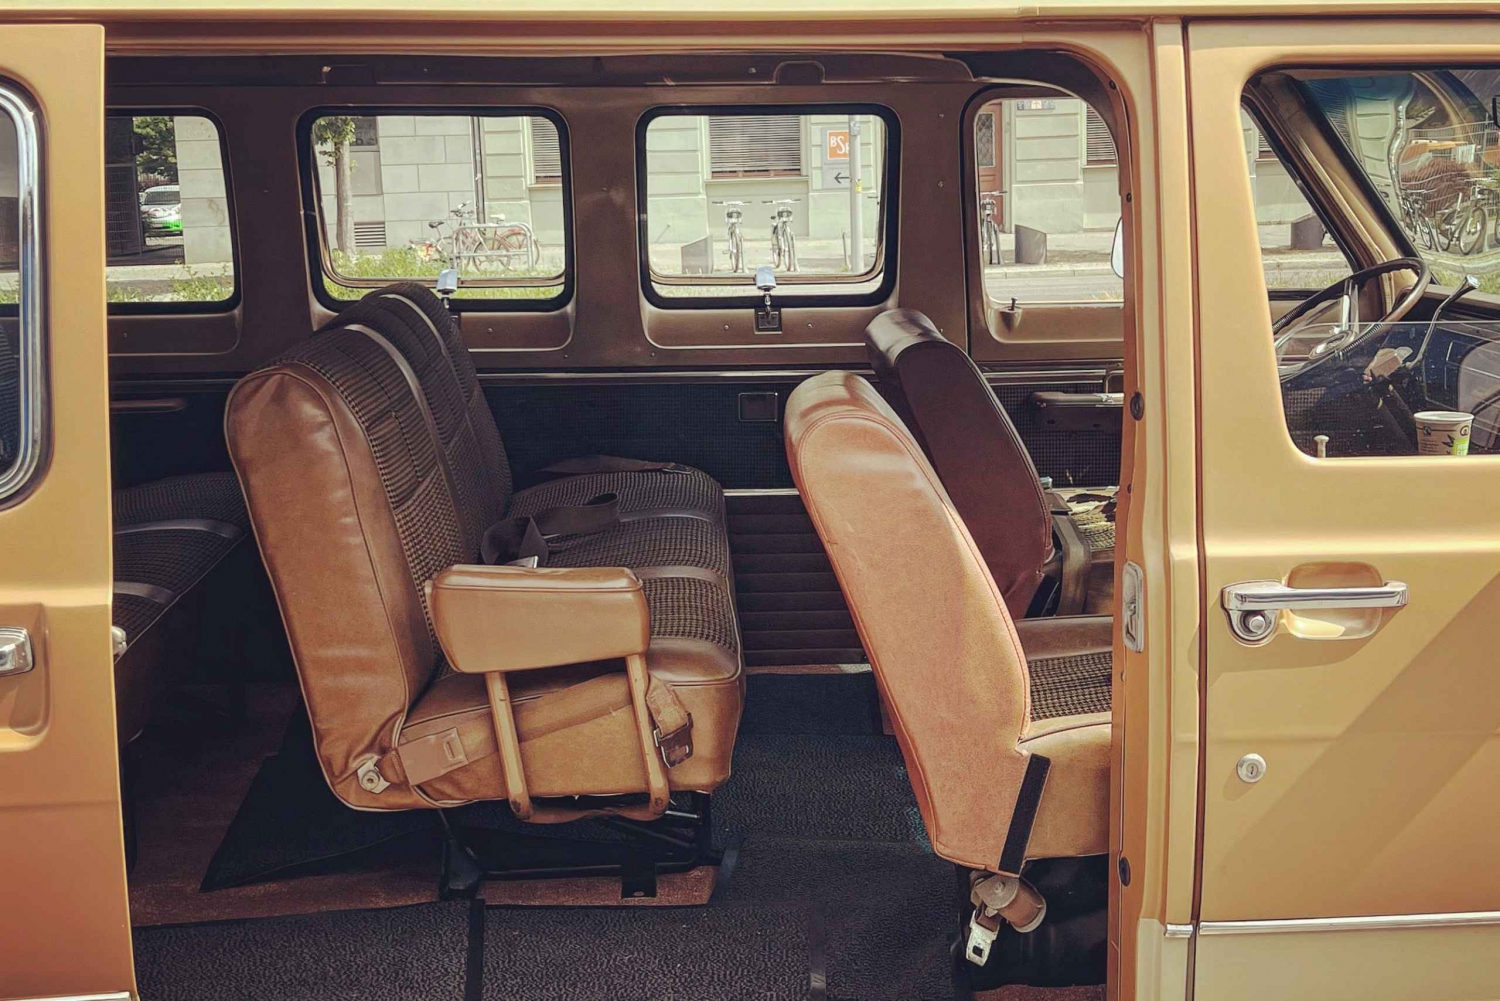 Berlin: DIY & Subculture Sightseeing in a 1972 Ford Van!